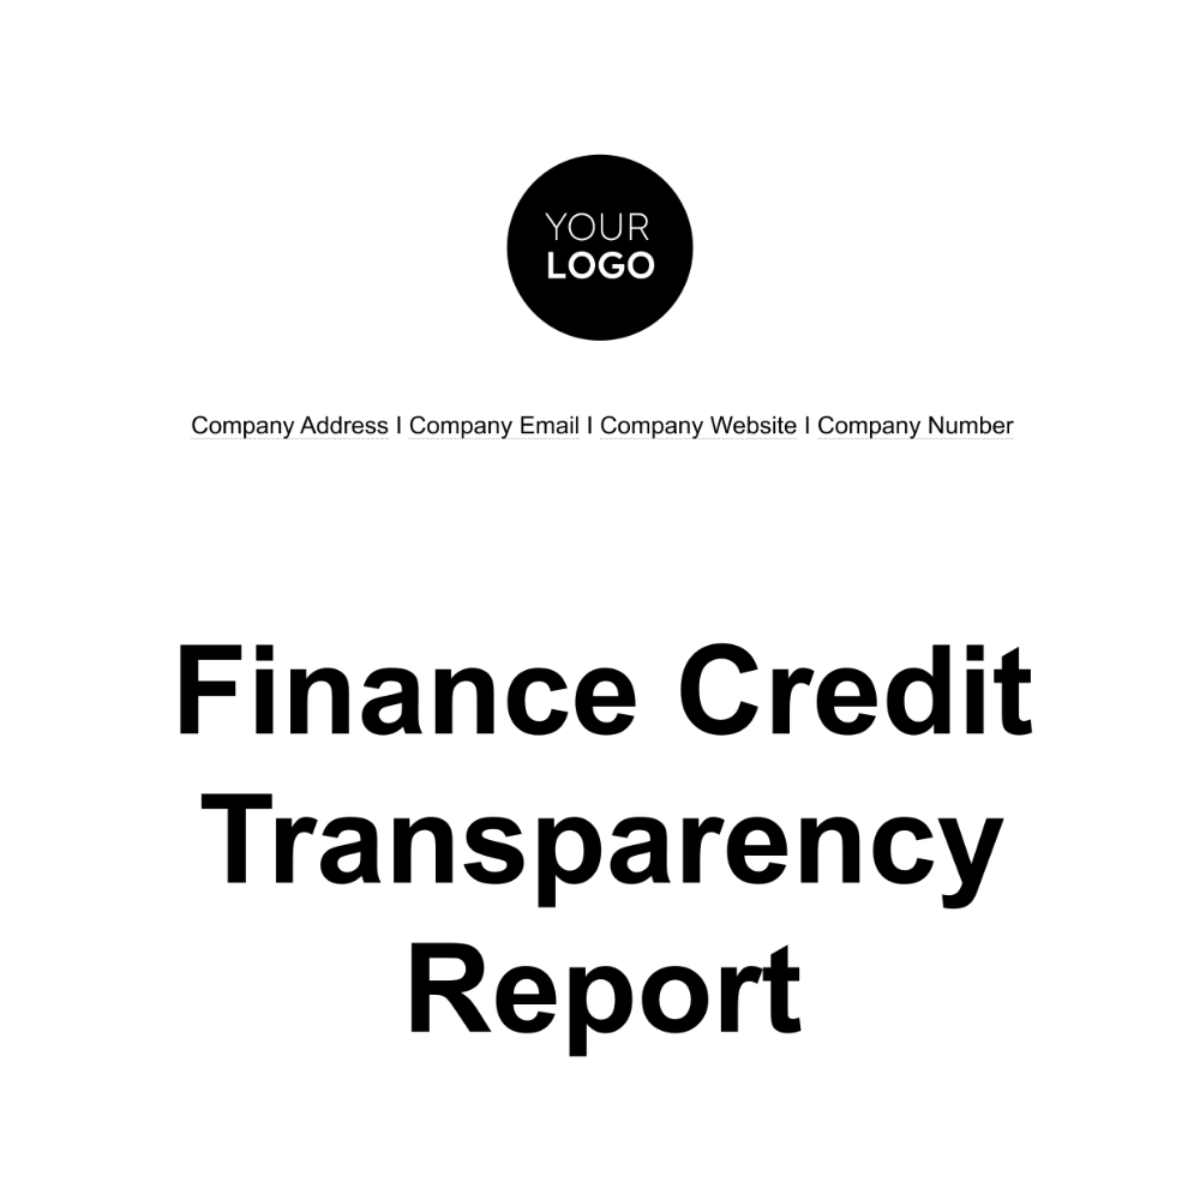 Finance Credit Transparency Report Template